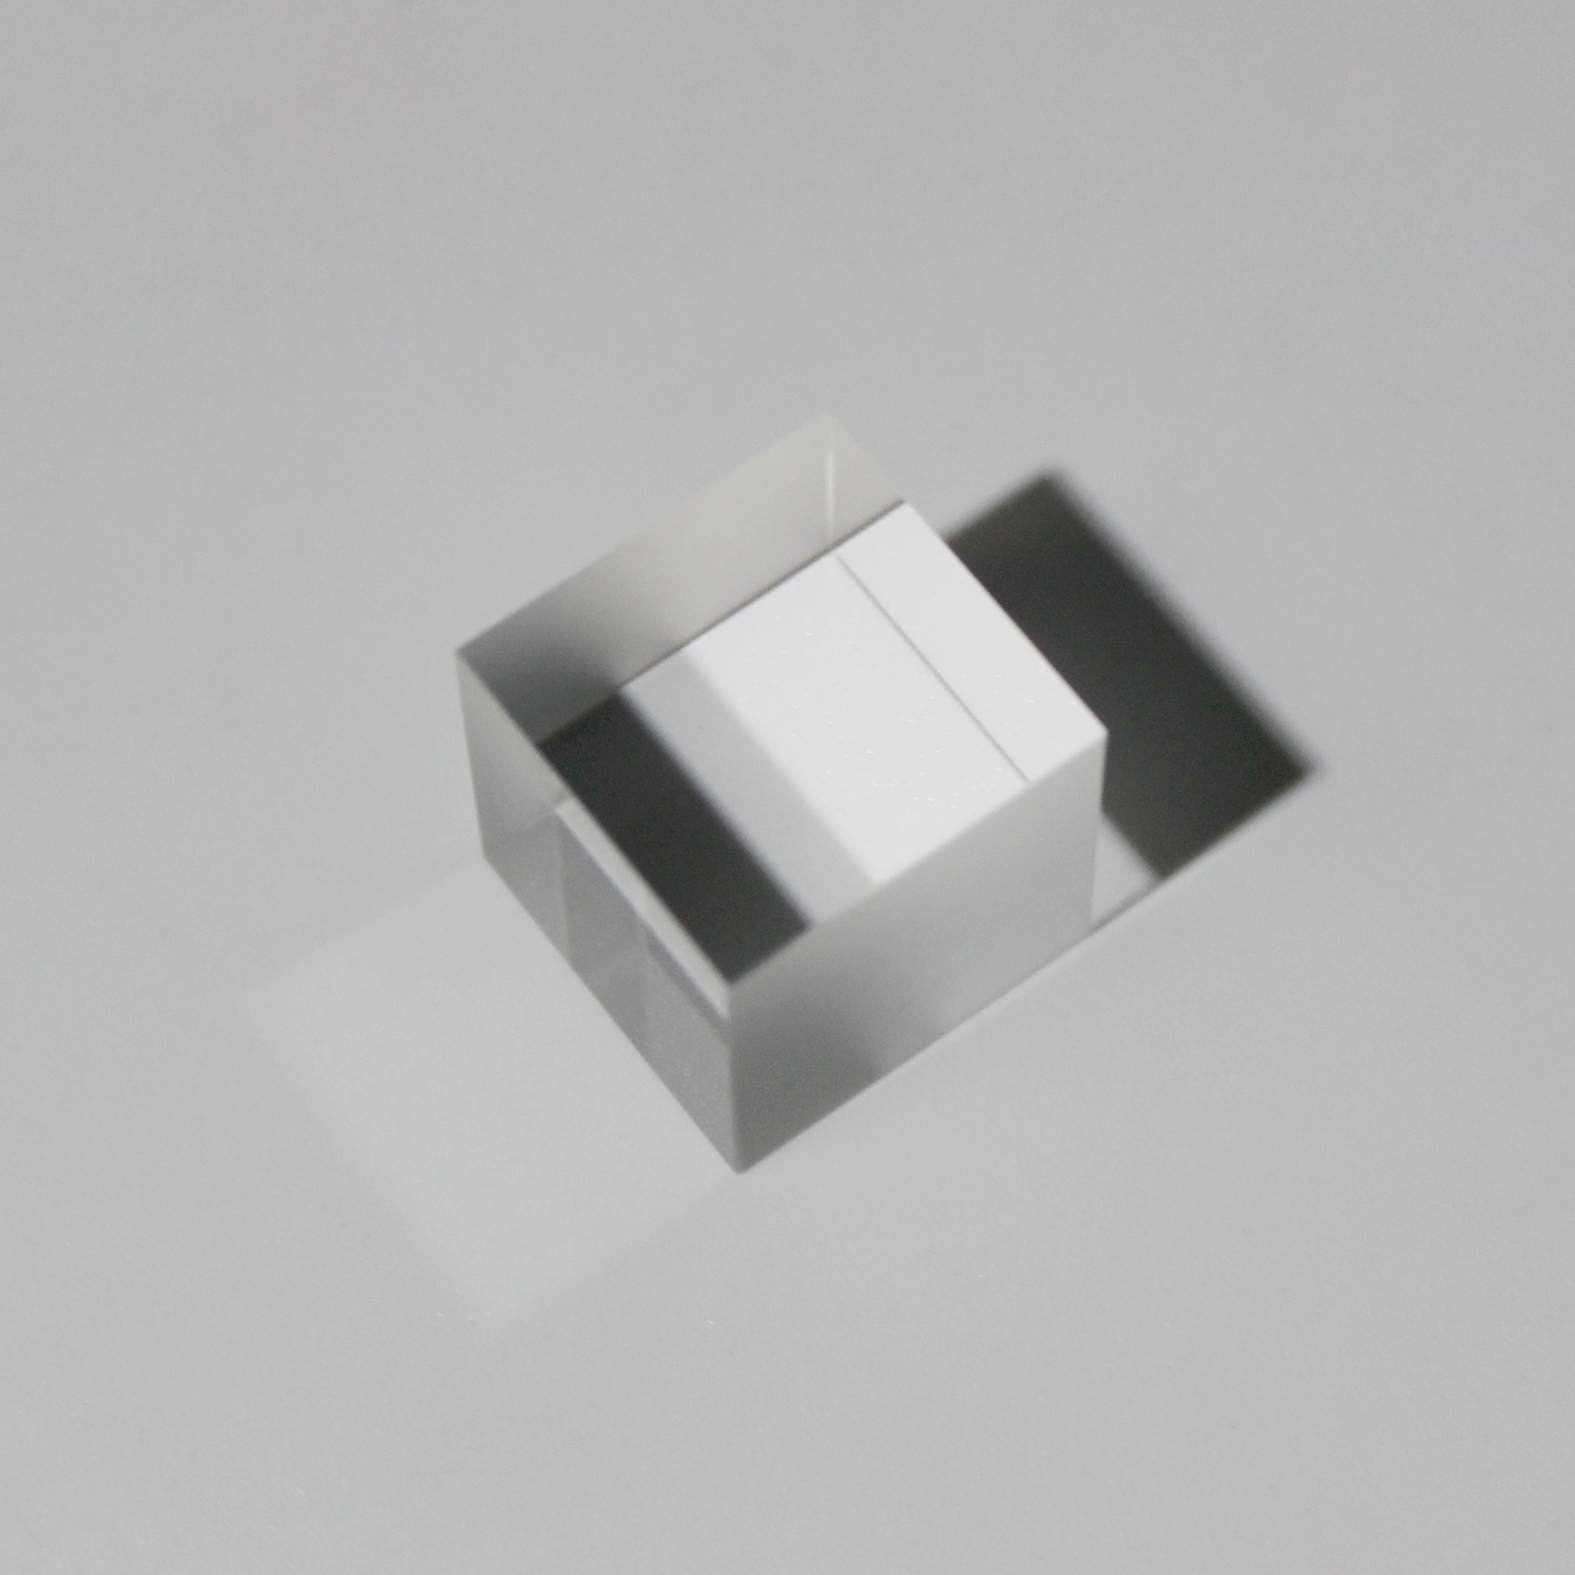 China Wholesale Manufacturer Direct Sale Optical Fused Silica Cube Prism